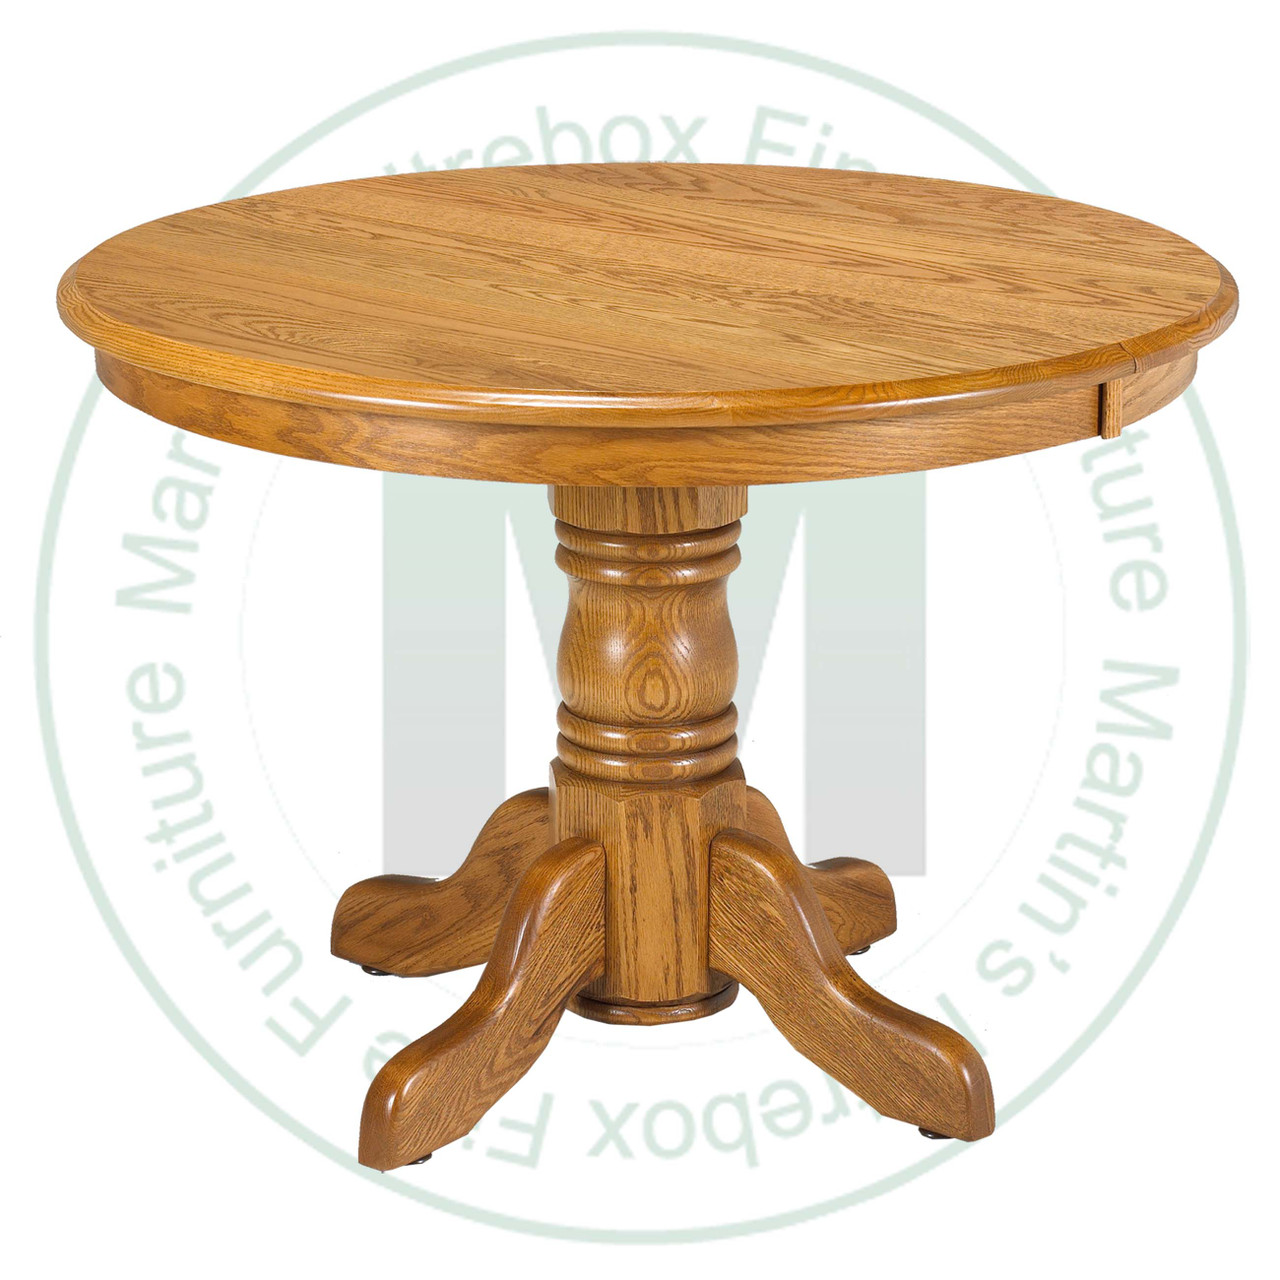 Maple Lancaster Collection Single Pedestal Table 36''D x 42''W x 30''H  Round Solid Table. Table Has 1'' Thick Top